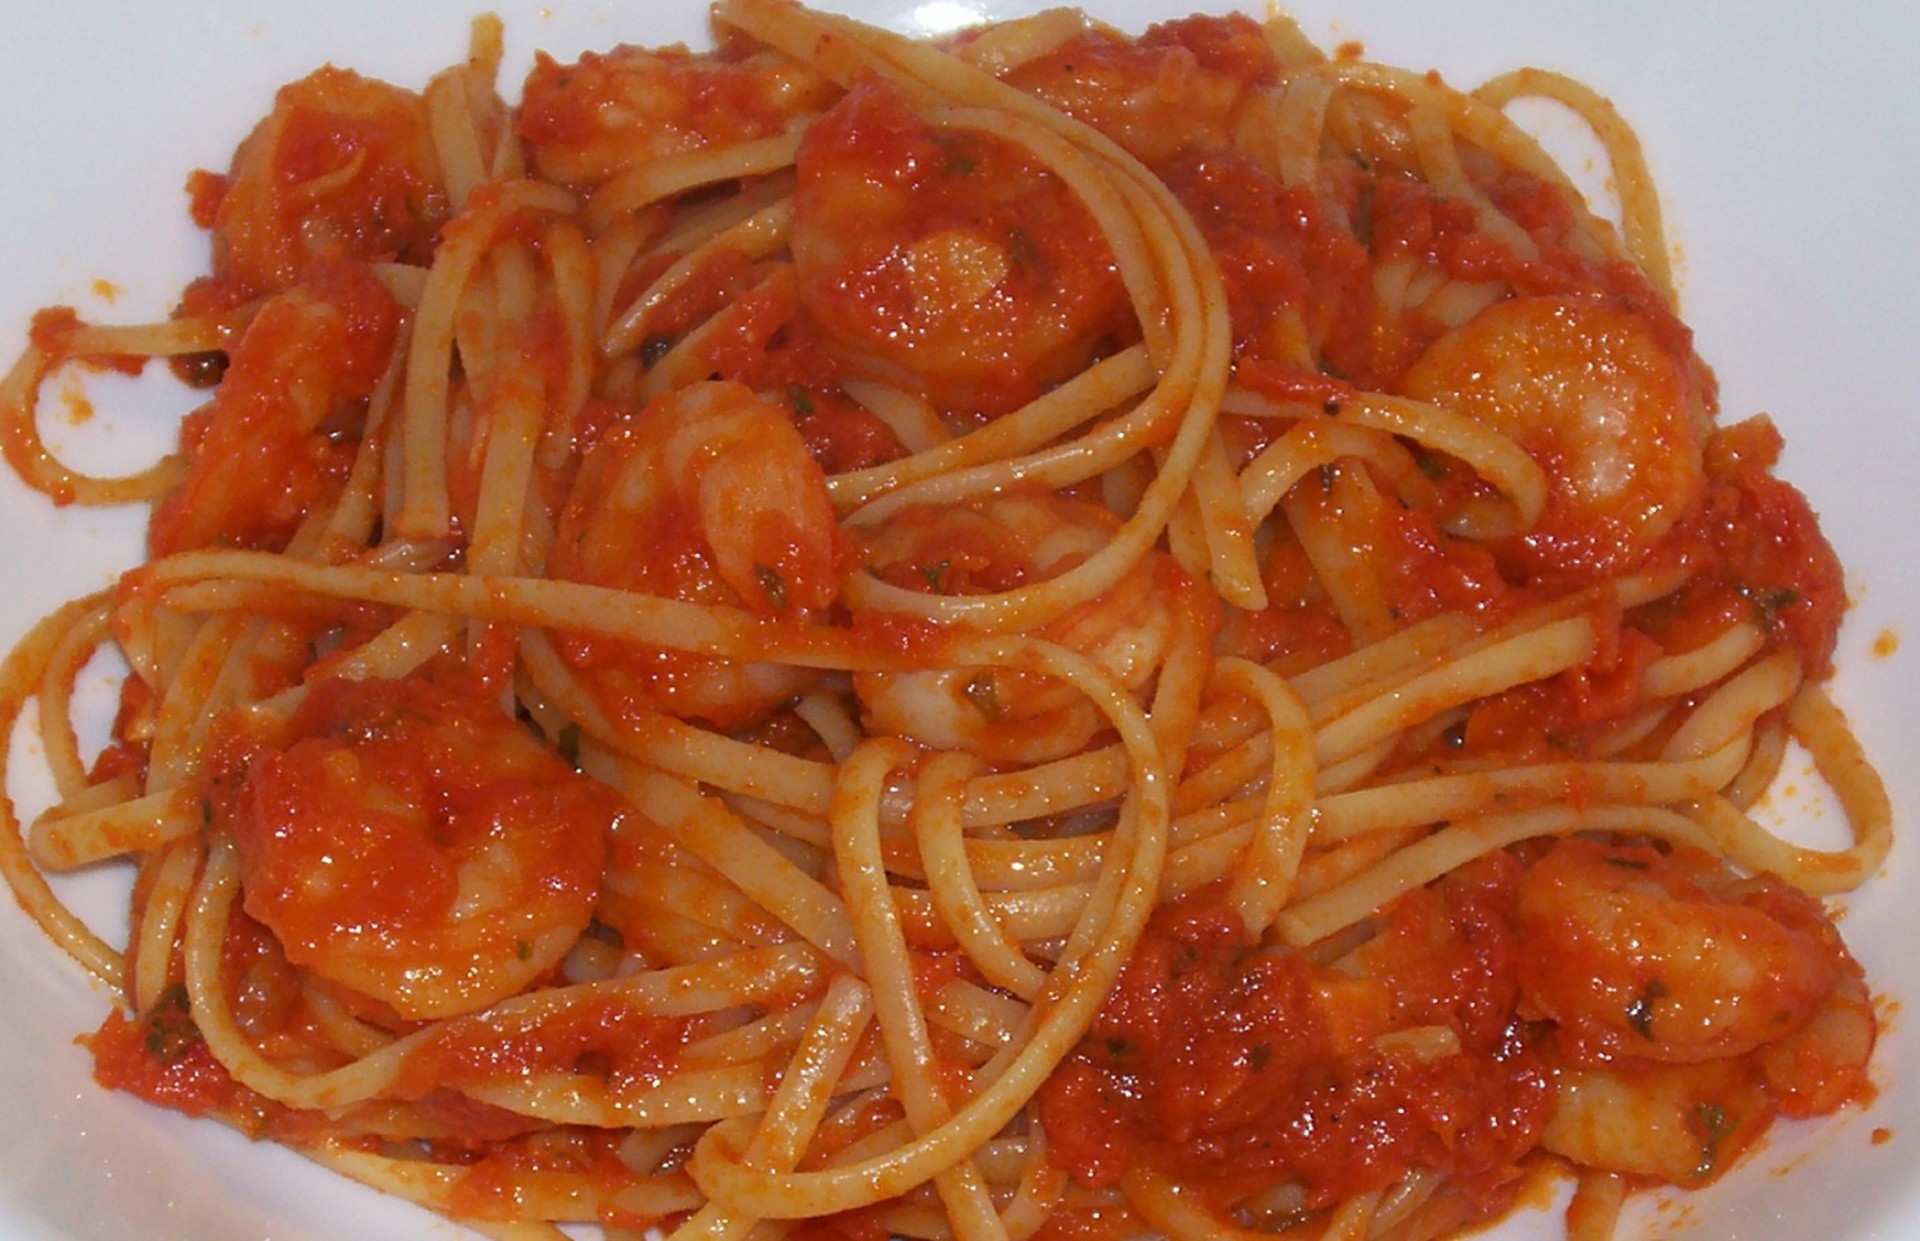 Linguine With Shrimp and Tomatoes